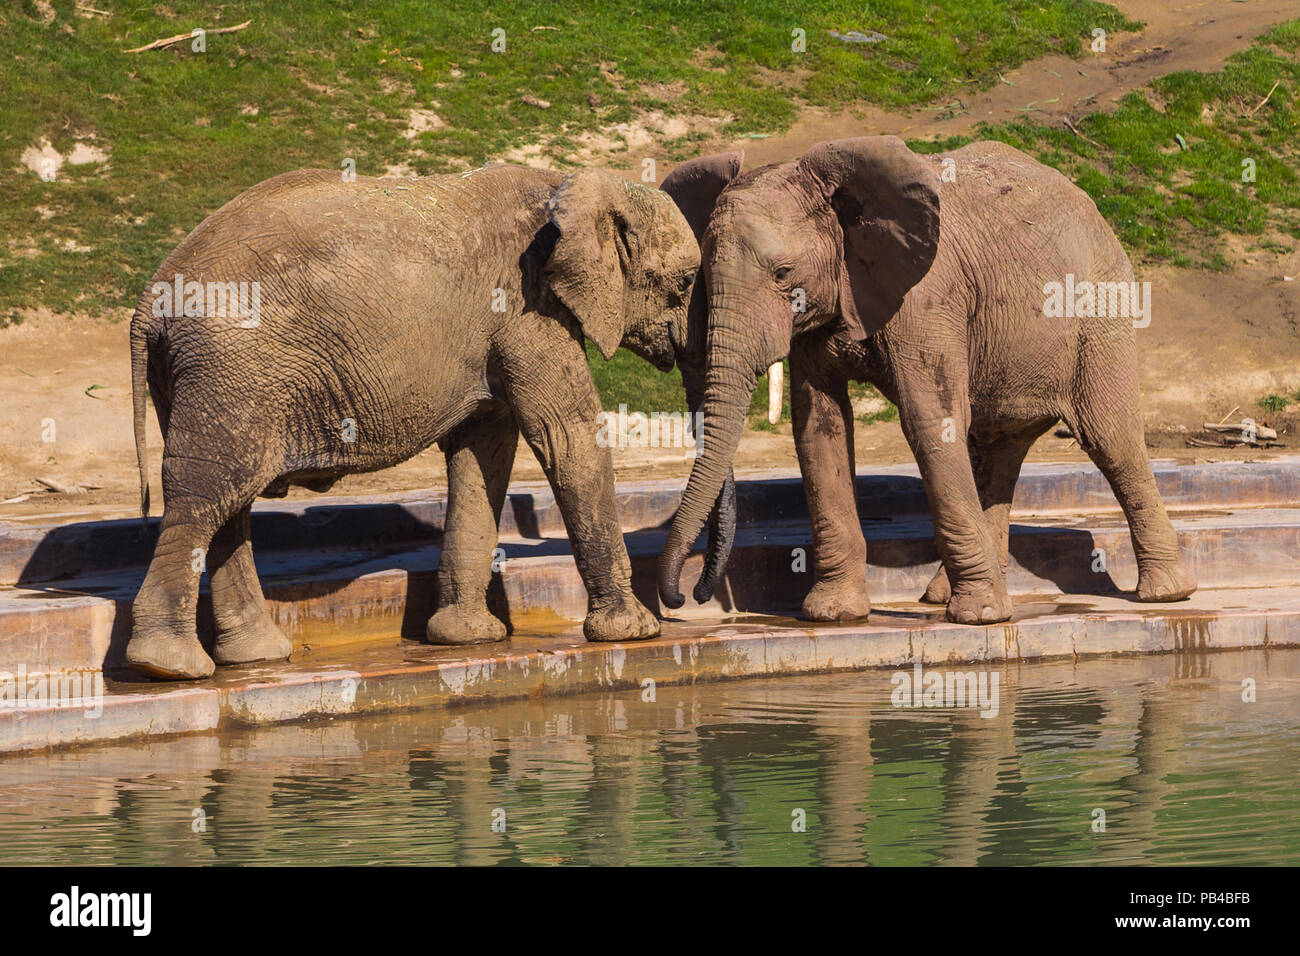 Young elephants play near a watering hole Stock Photo